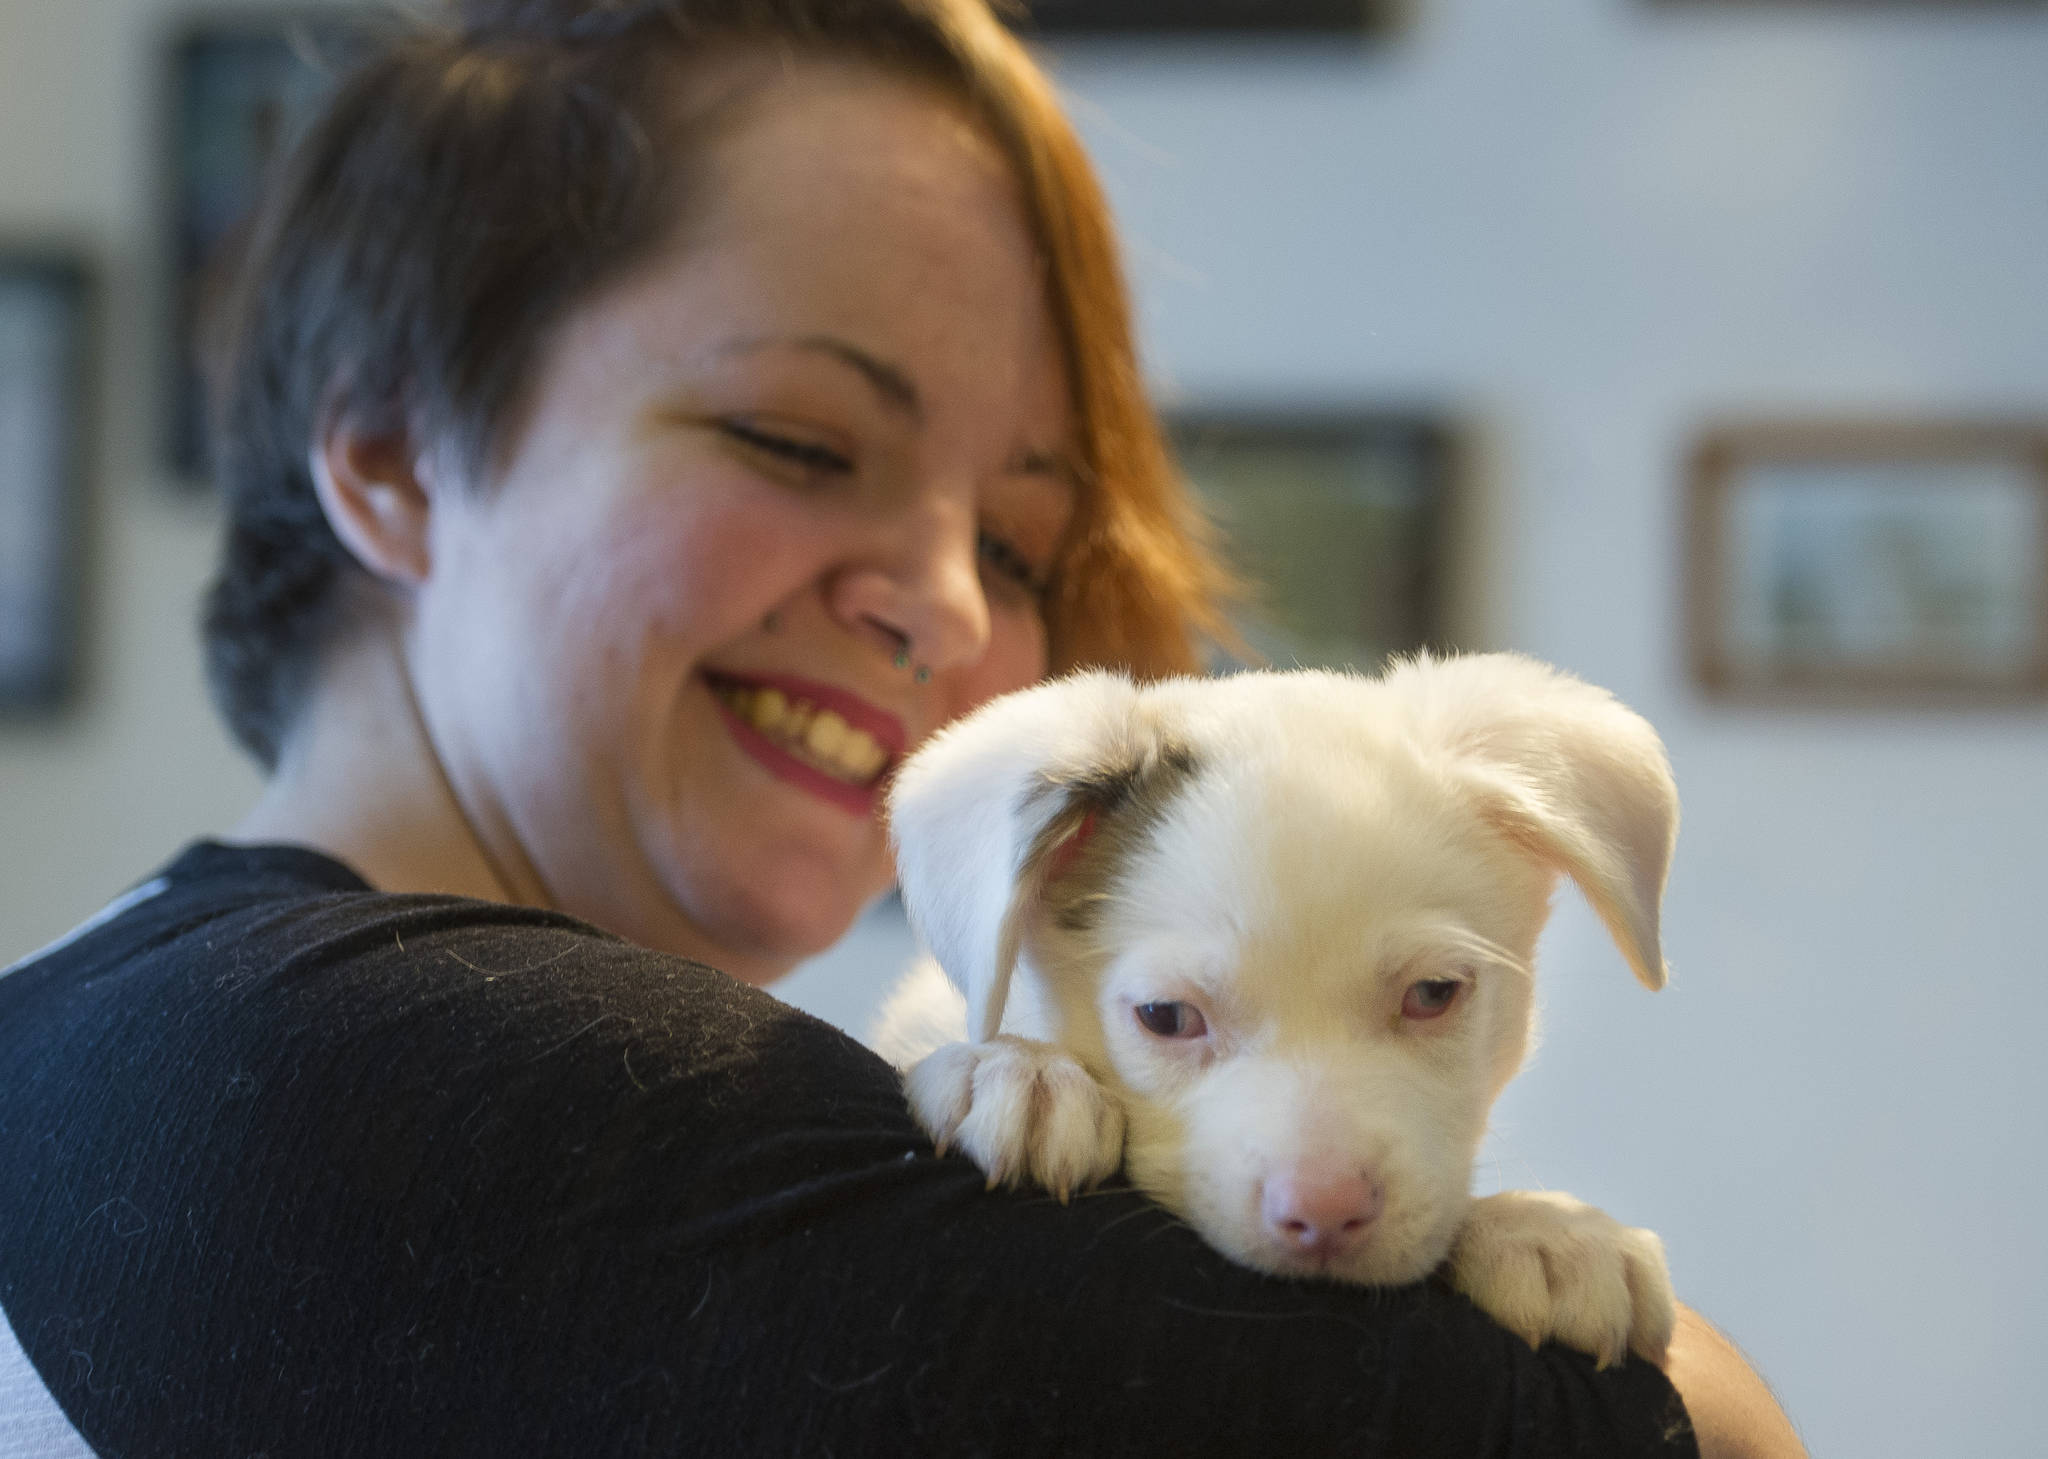 Briana Brint, president of Southeast Alaska Organization for Animals, holds Sid who is blind and deaf at a animal foster home in Juneau on Thursday, Nov. 30, 2017. Sid is from a litter rescued from Prince of Wales by the organization. (Michael Penn | Juneau Empire)